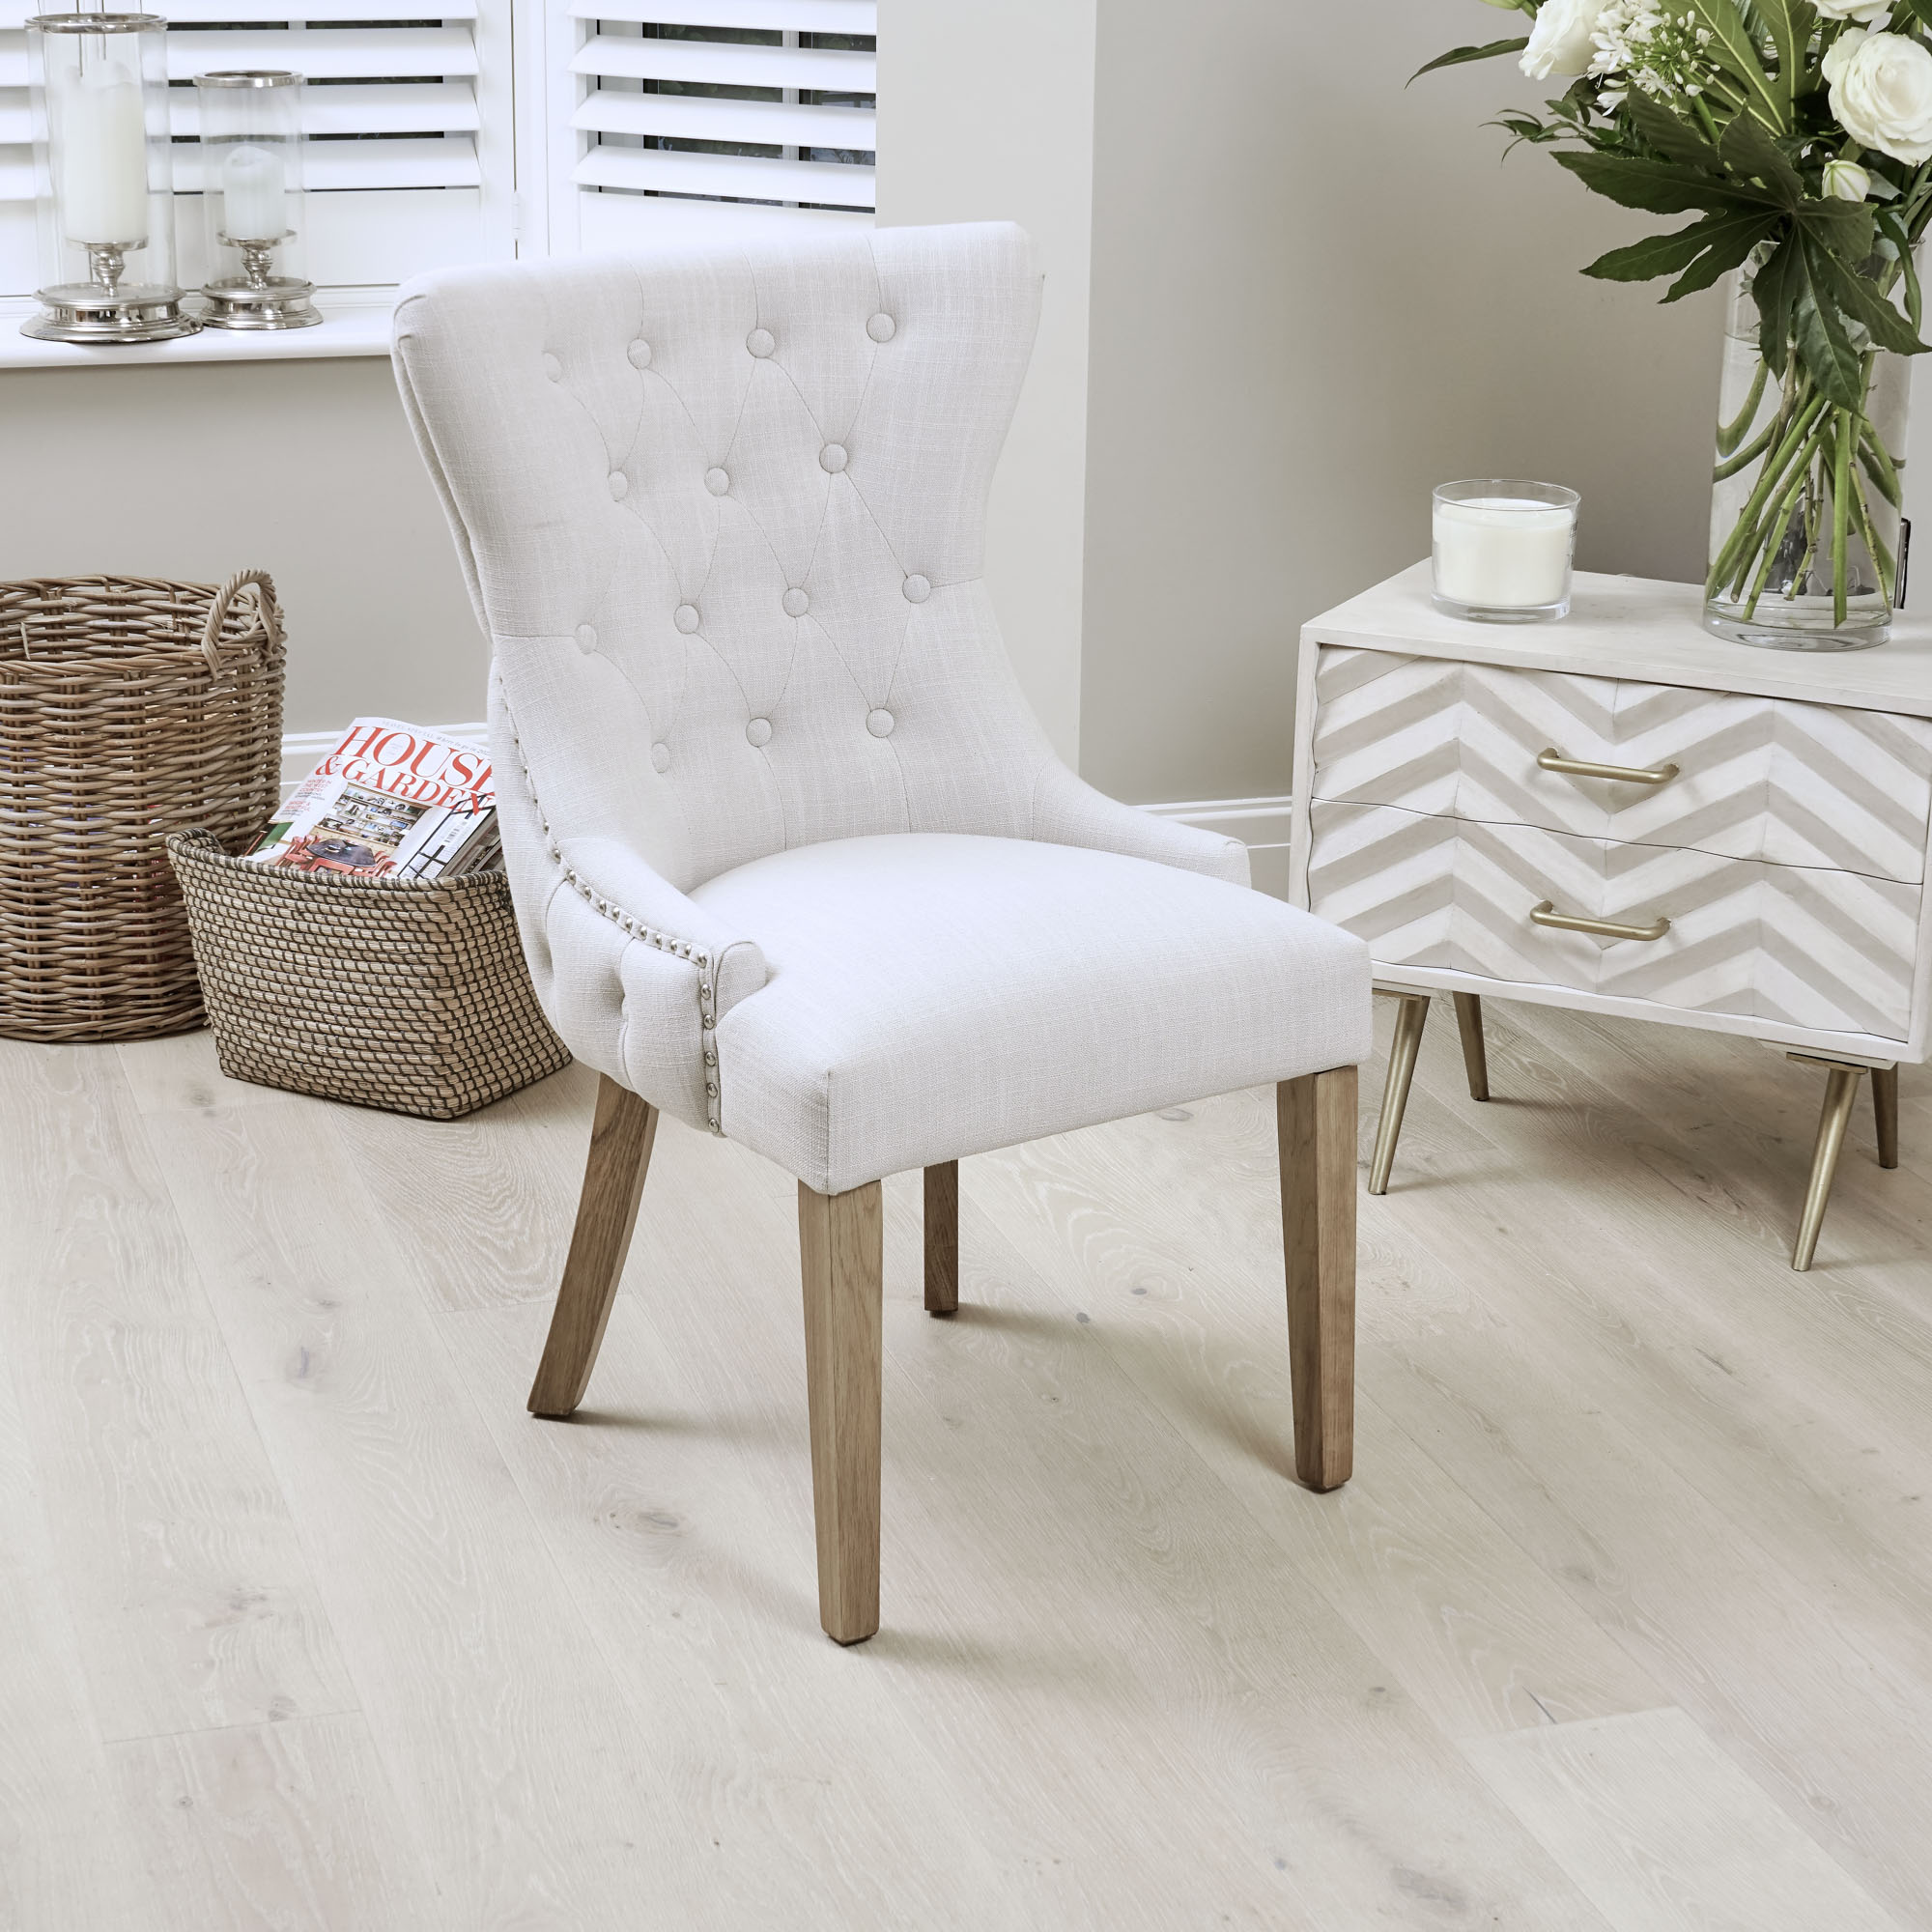 Knightsbridge Natural Linen Buttoned Scoop Dining Chair with Solid Oak Legs